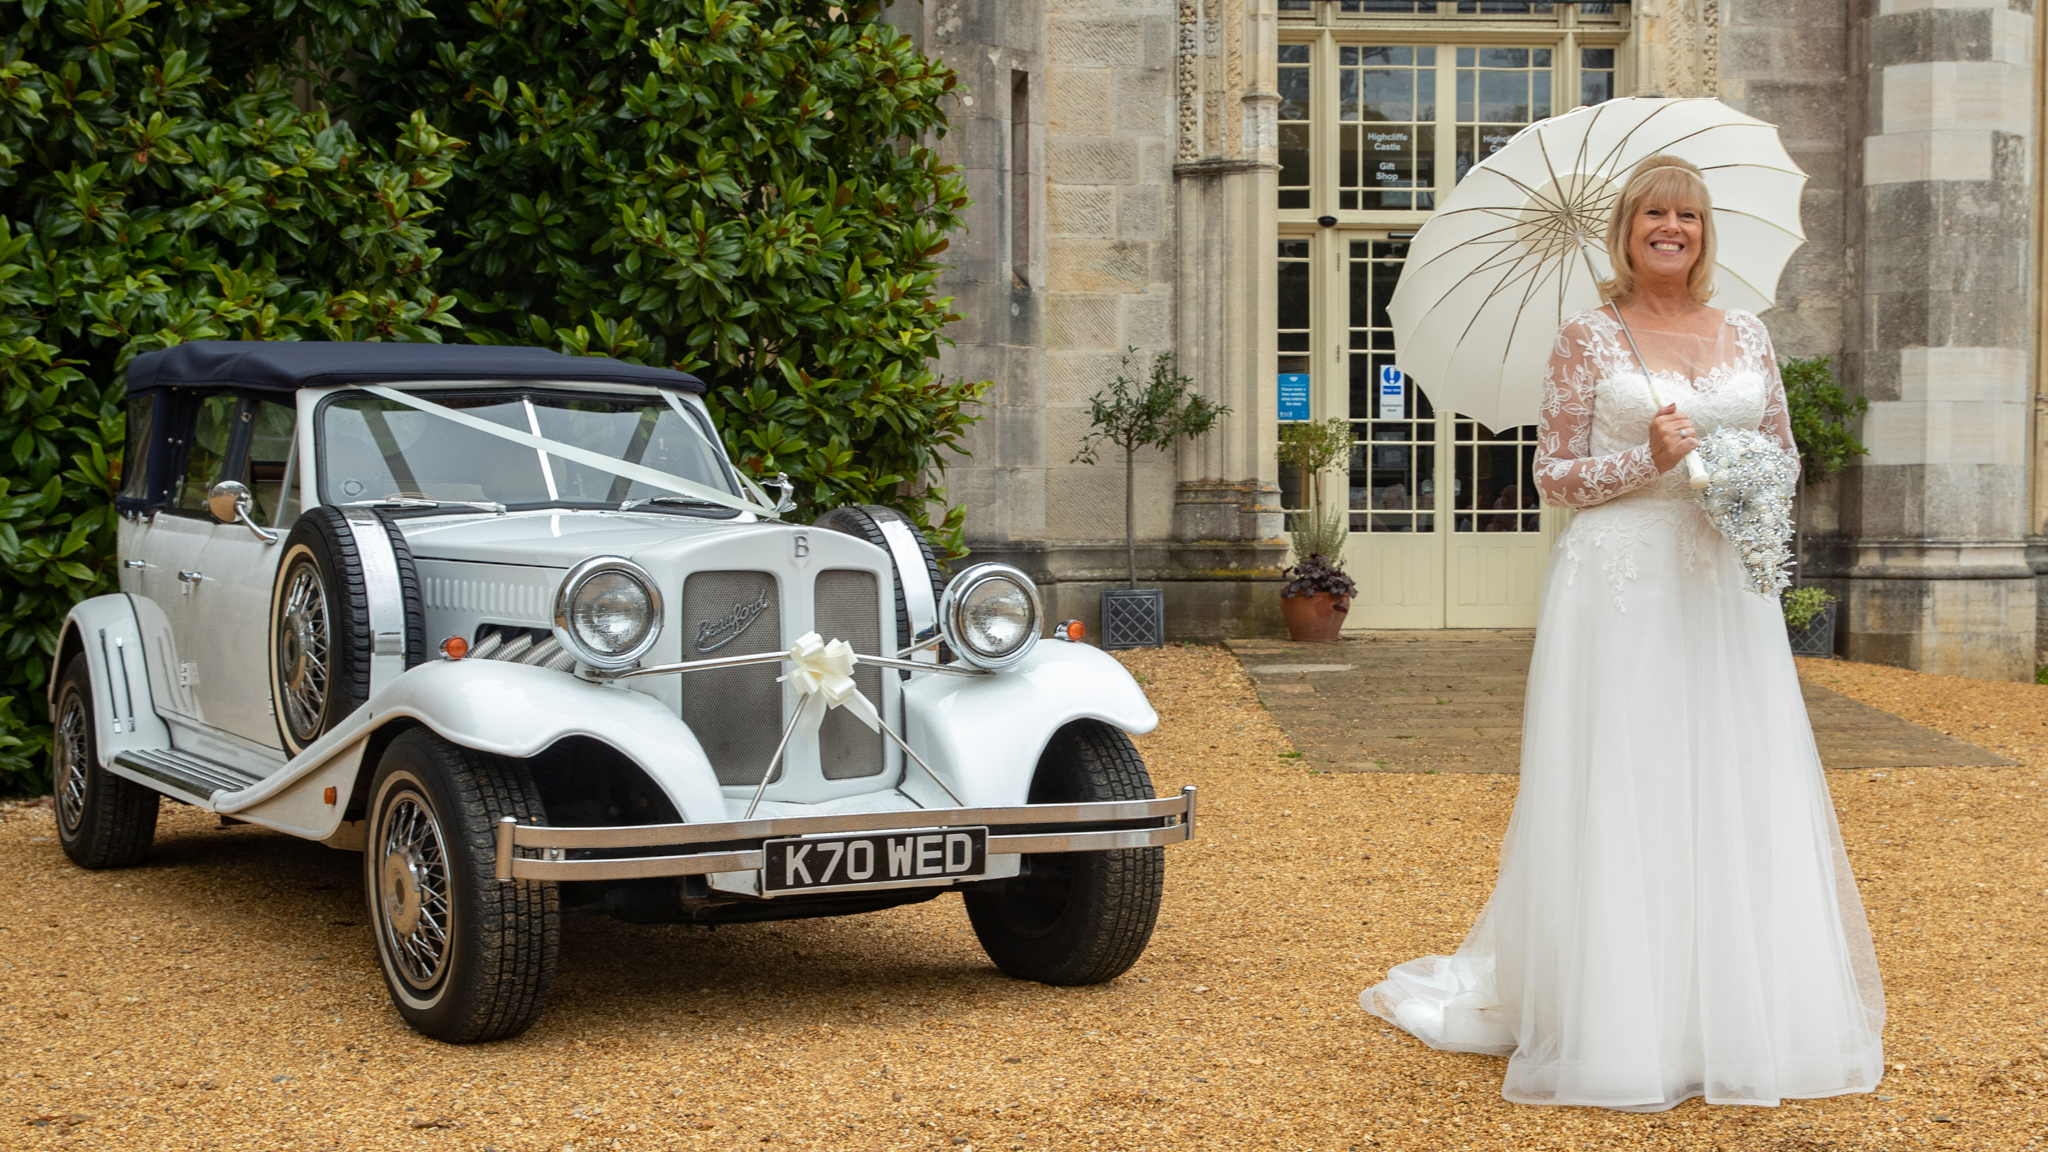 White vintage Beauford convertible with roof up decorated with white ribbon and bow at a local Margate wedding. Smiling bride standing next to the vehicle with a white umbrella hol